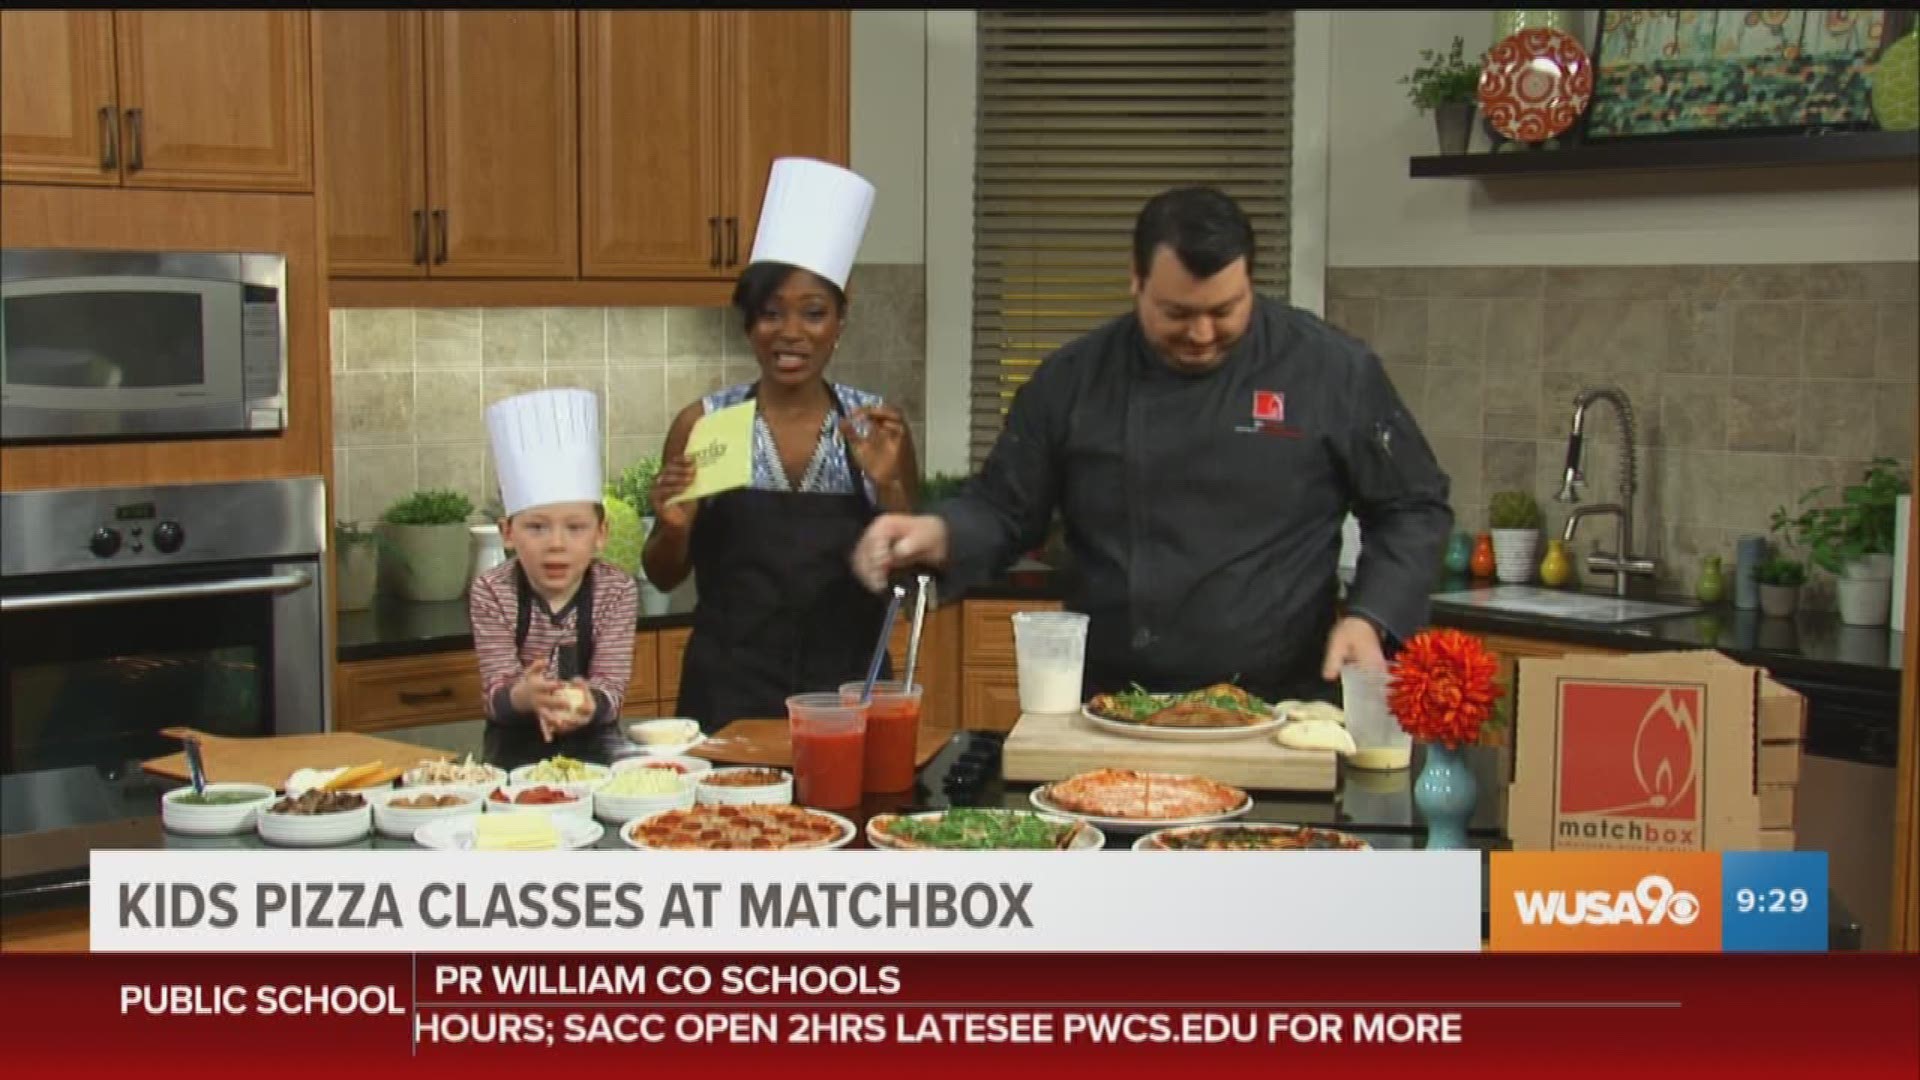 Matchbox Culinary Director Jim Drost and his son, Alden, show how you and your kids how to make pizza. Matchbox will host a series of kids pizza parties and classes beginning February 9th.